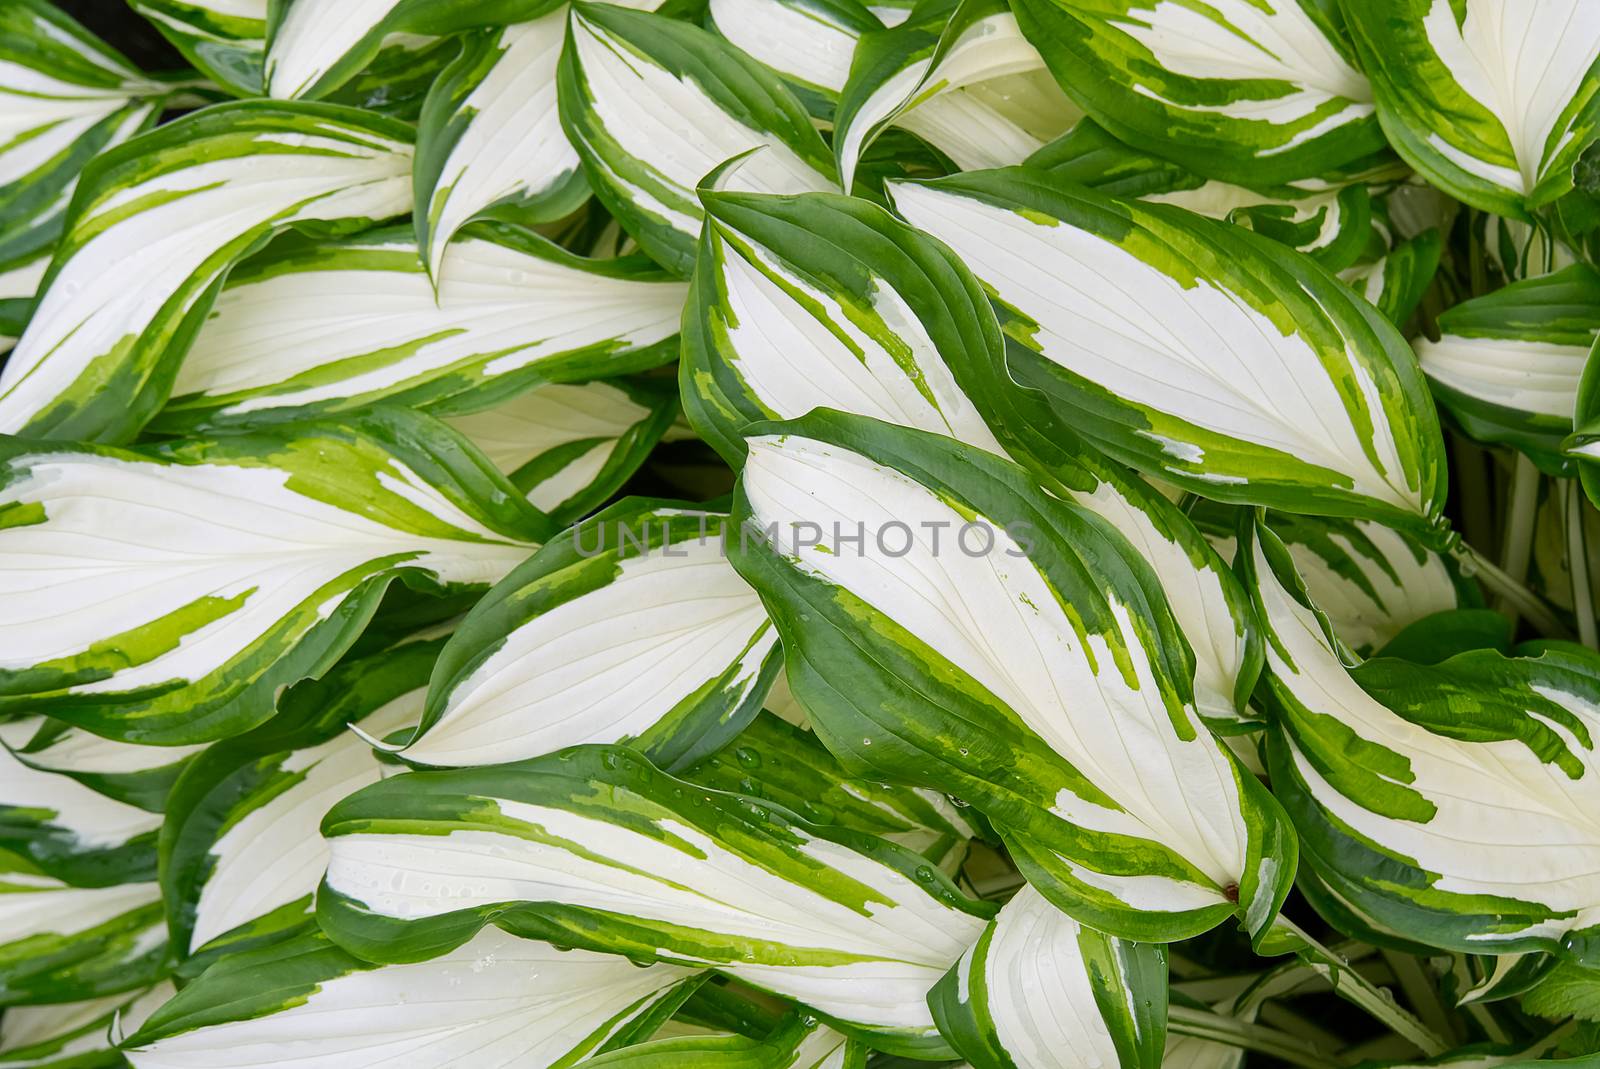 Plantain lilies, Hosta plant in the garden. Close-up green and white leaves, background